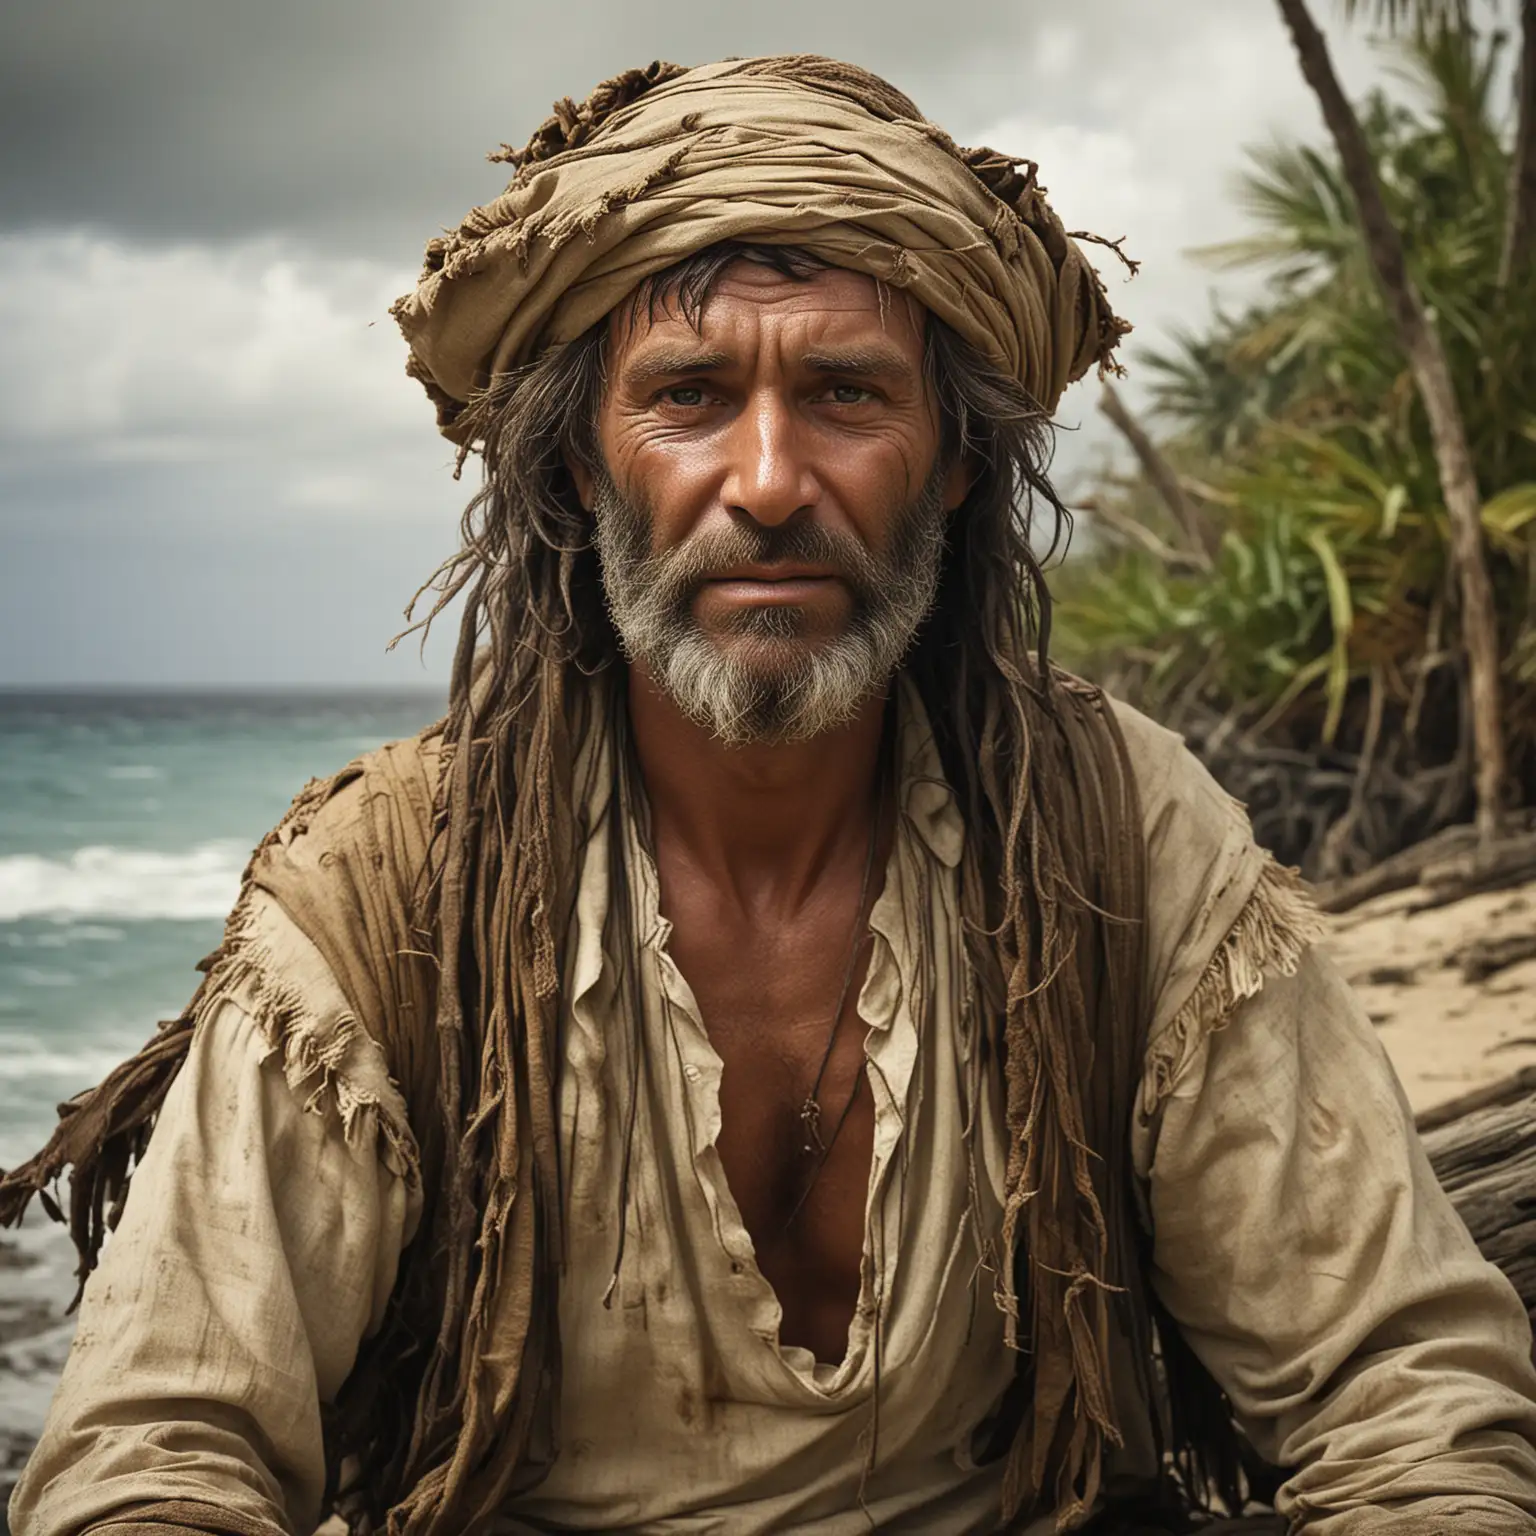 Robinson-Crusoe-Survival-Clothing-WeatherBeaten-and-Wild-Look